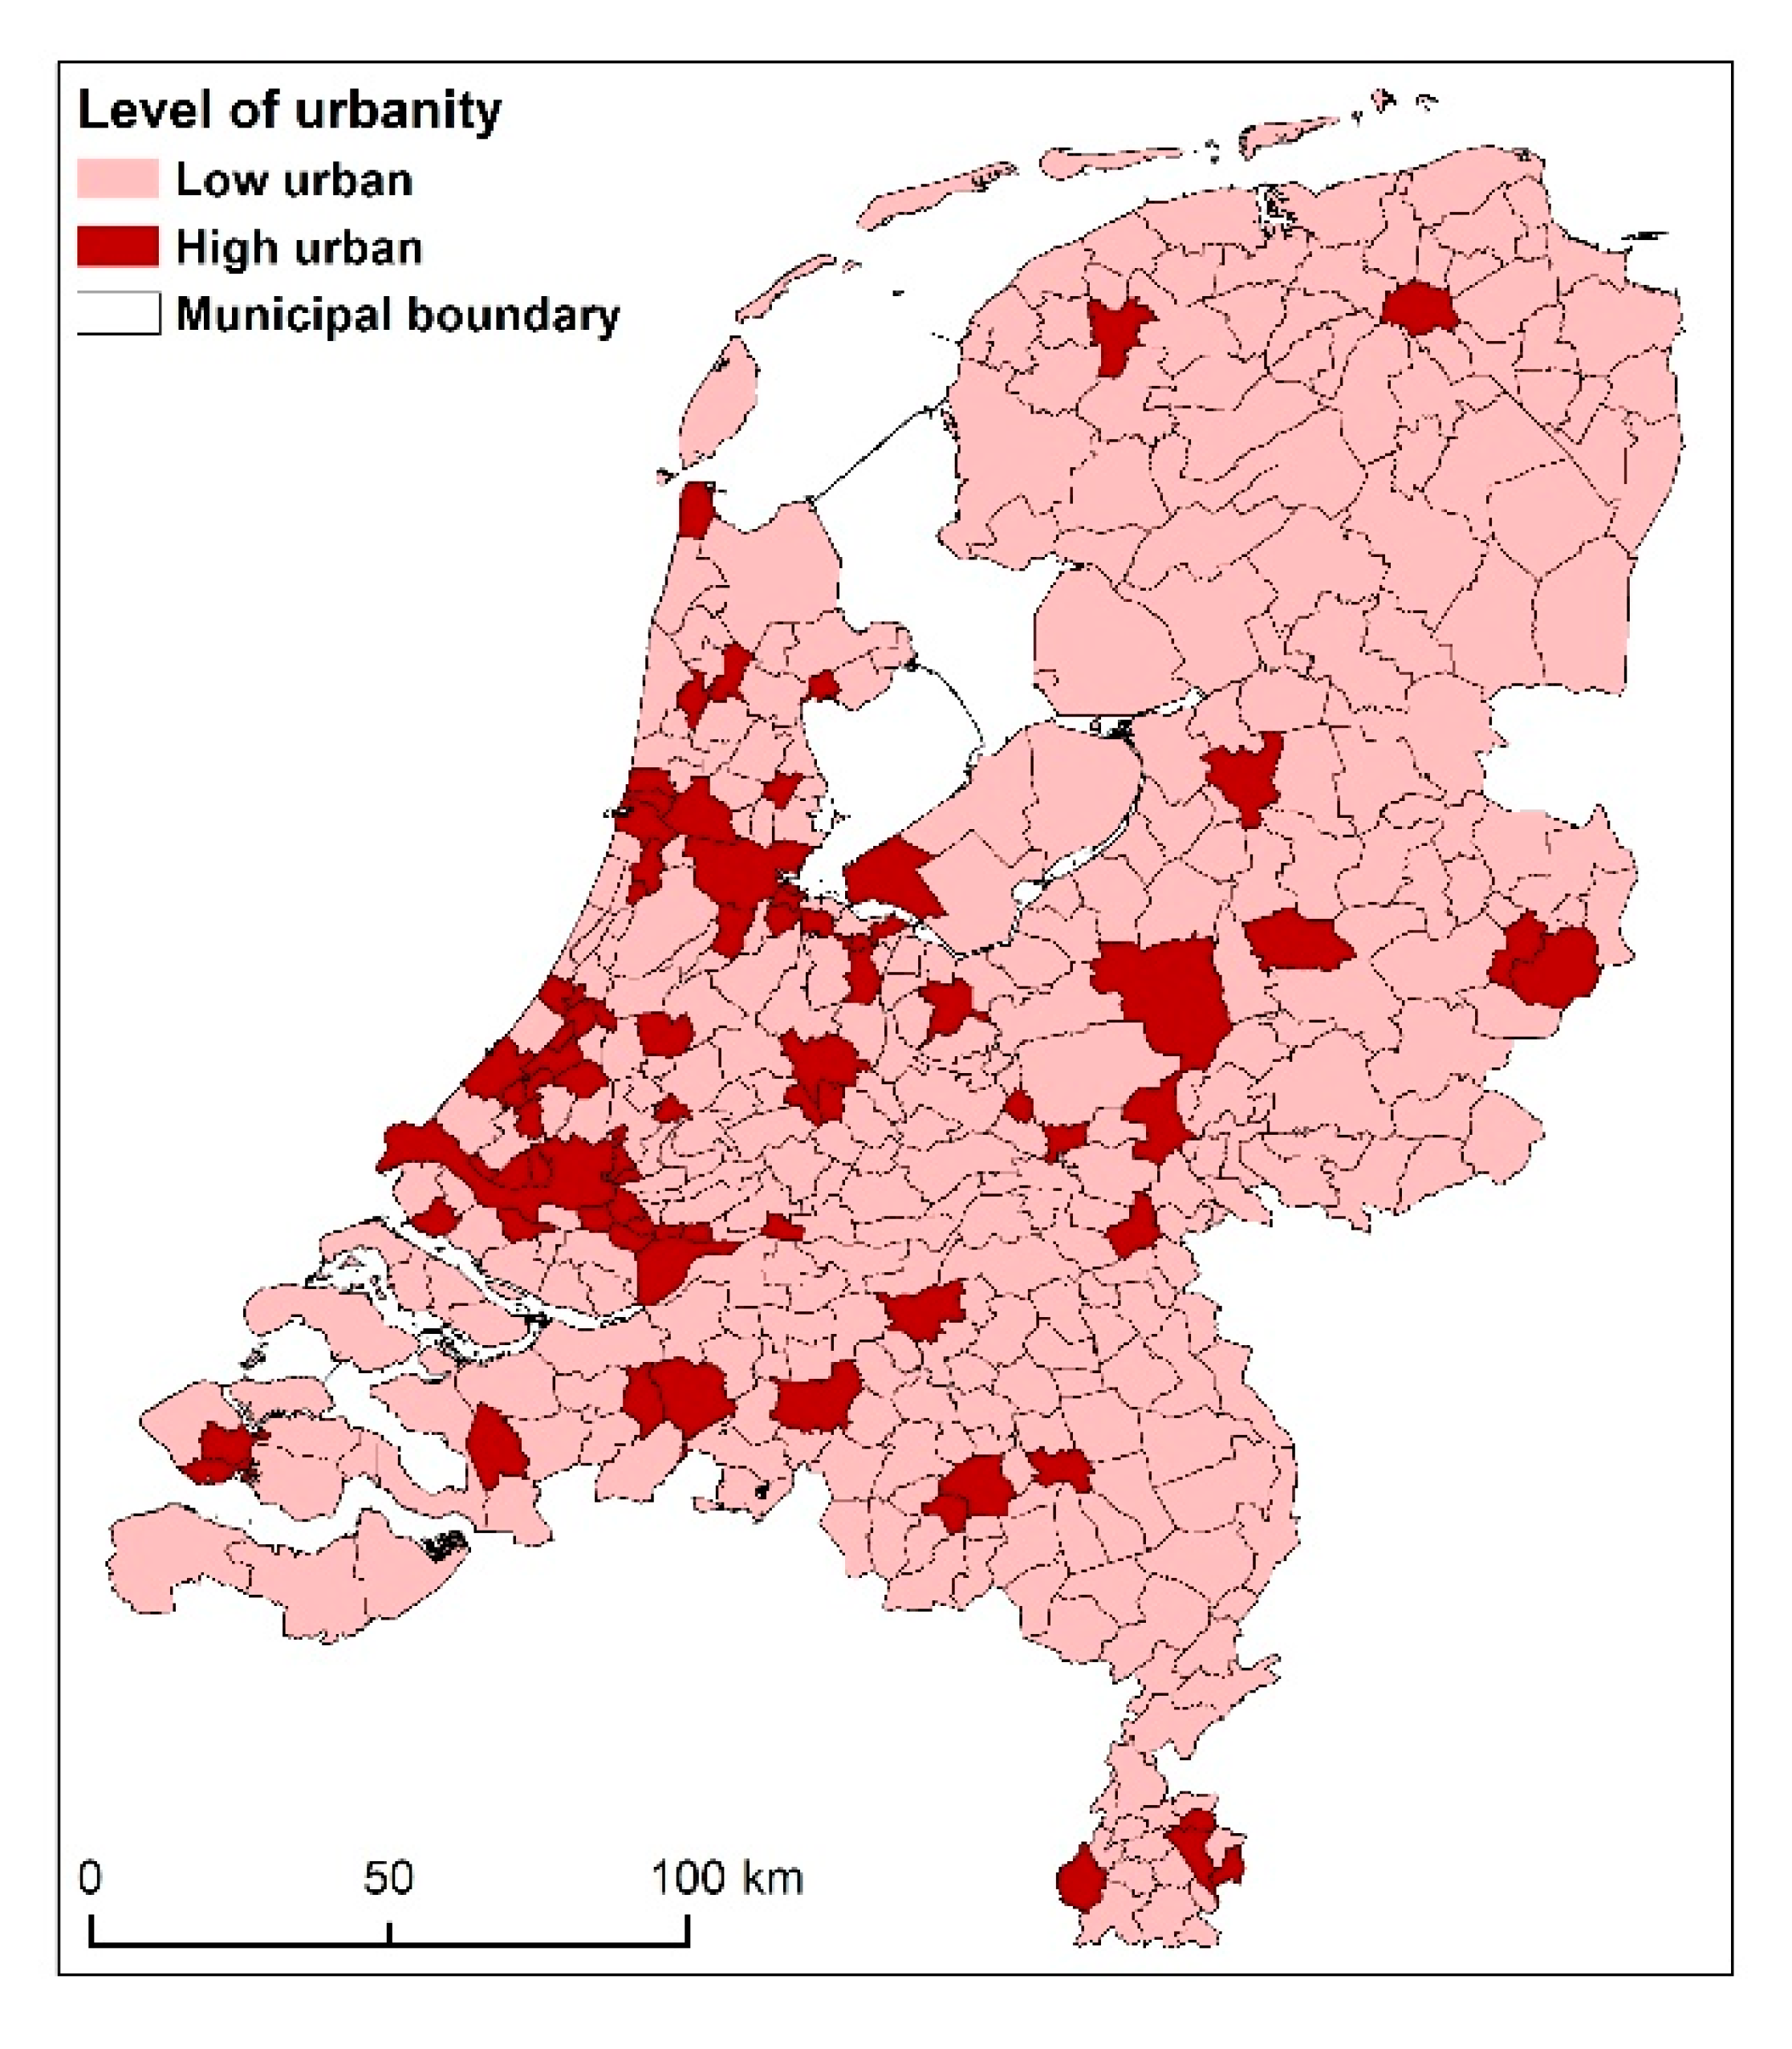 Sustainability | Free Full-Text | Environmental Justice in The Netherlands:  Presence and Quality of Greenspace Differ by Socioeconomic Status of  Neighbourhoods | HTML